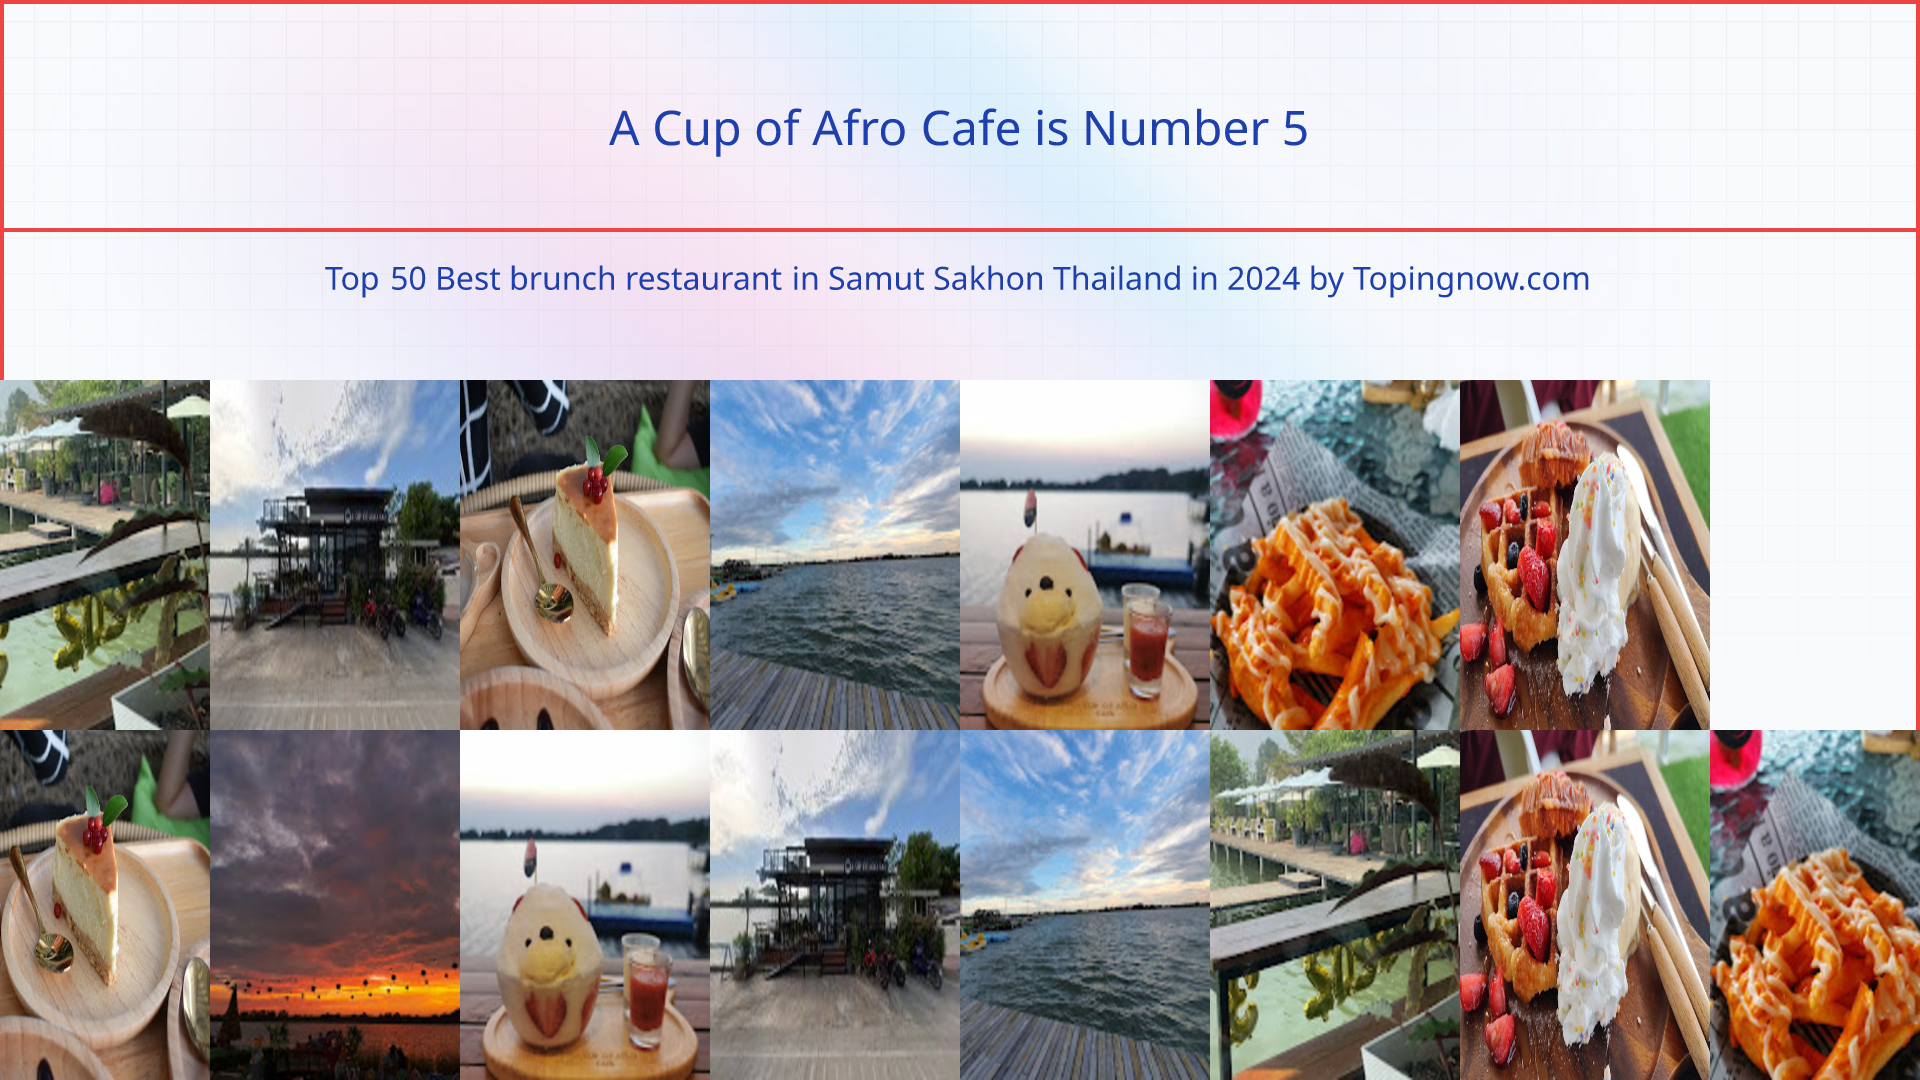 A Cup of Afro Cafe: Top 50 Best brunch restaurant in Samut Sakhon Thailand in 2024